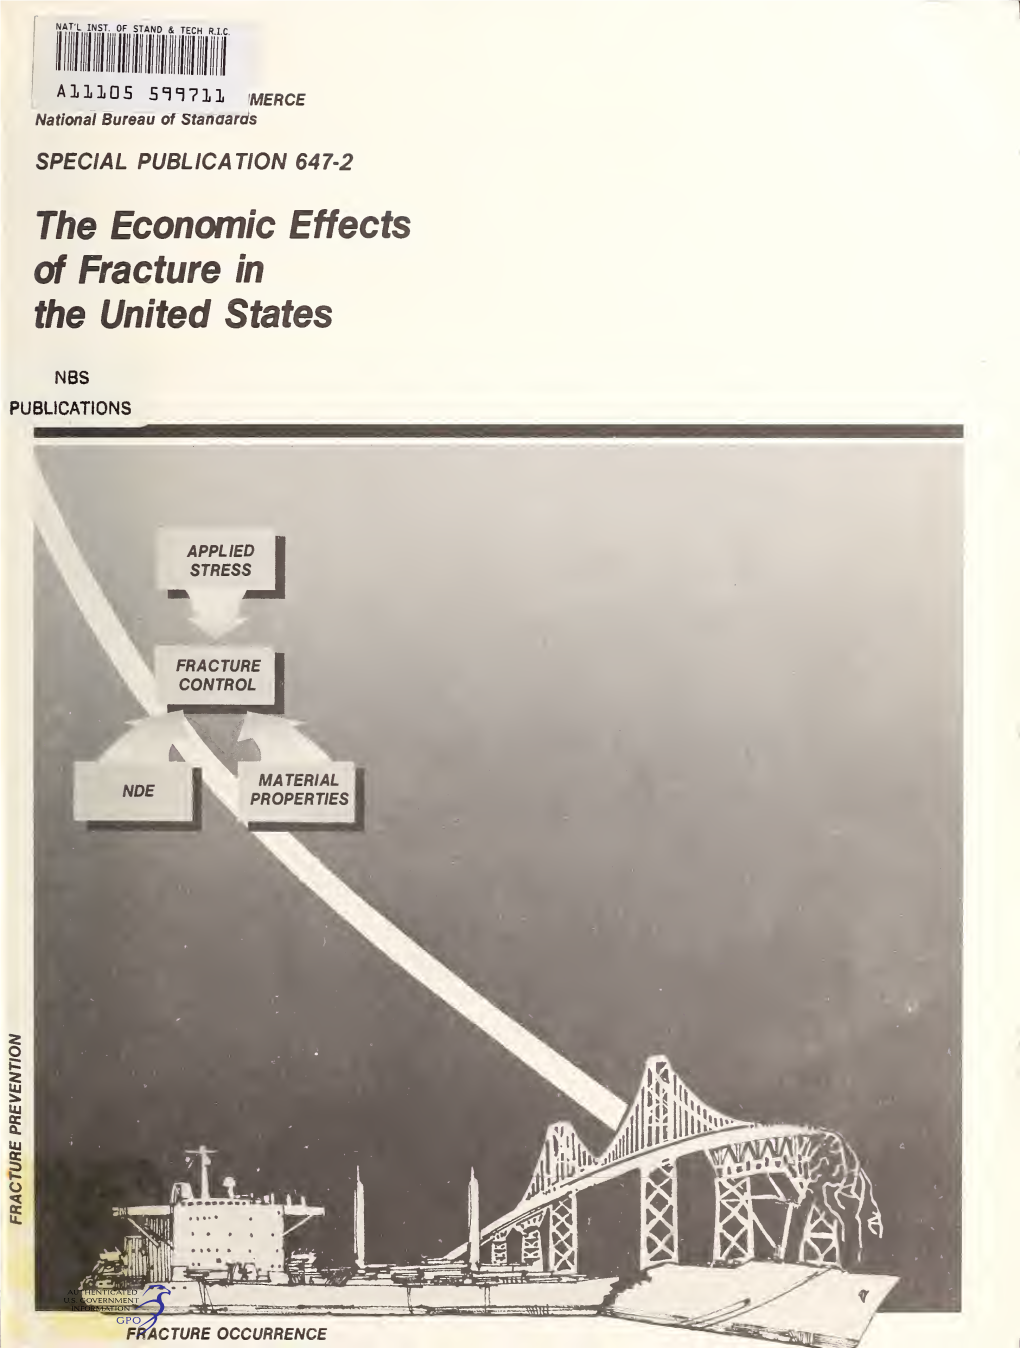 The Economic Effects of Fracture in the United States